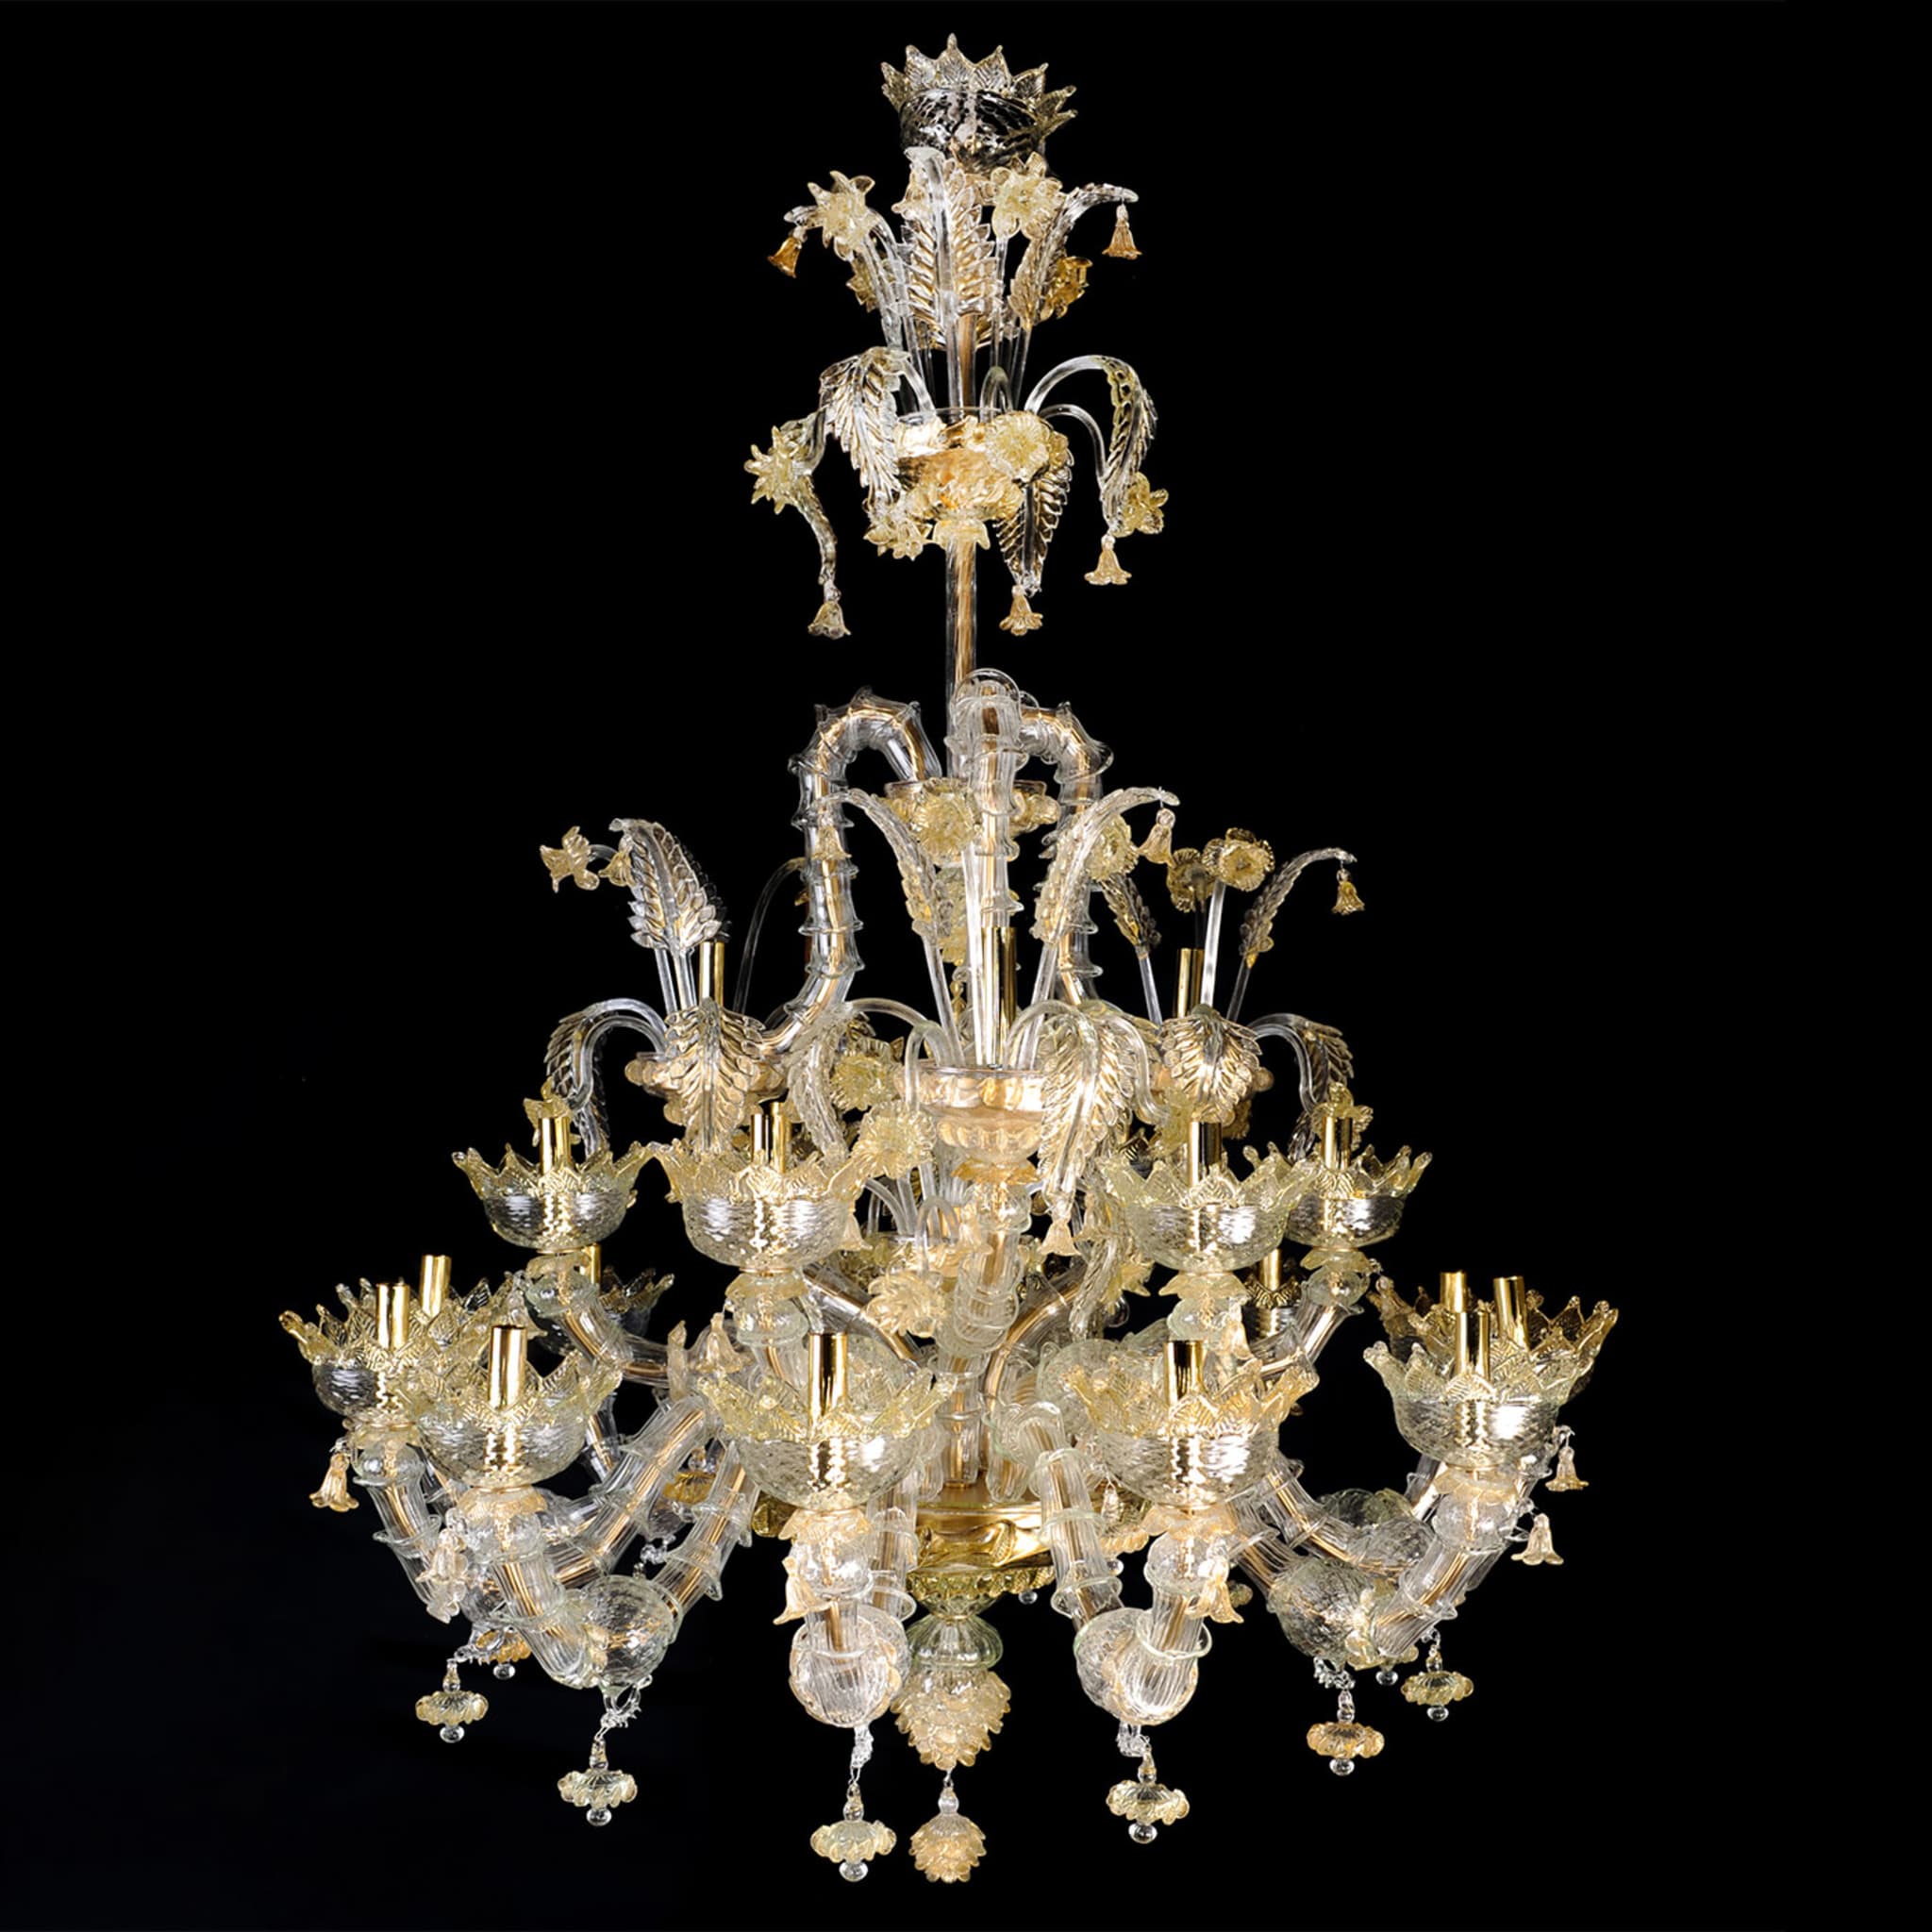 Rezzonico-style Gold and Crystal Chandelier #6 - Alternative view 3